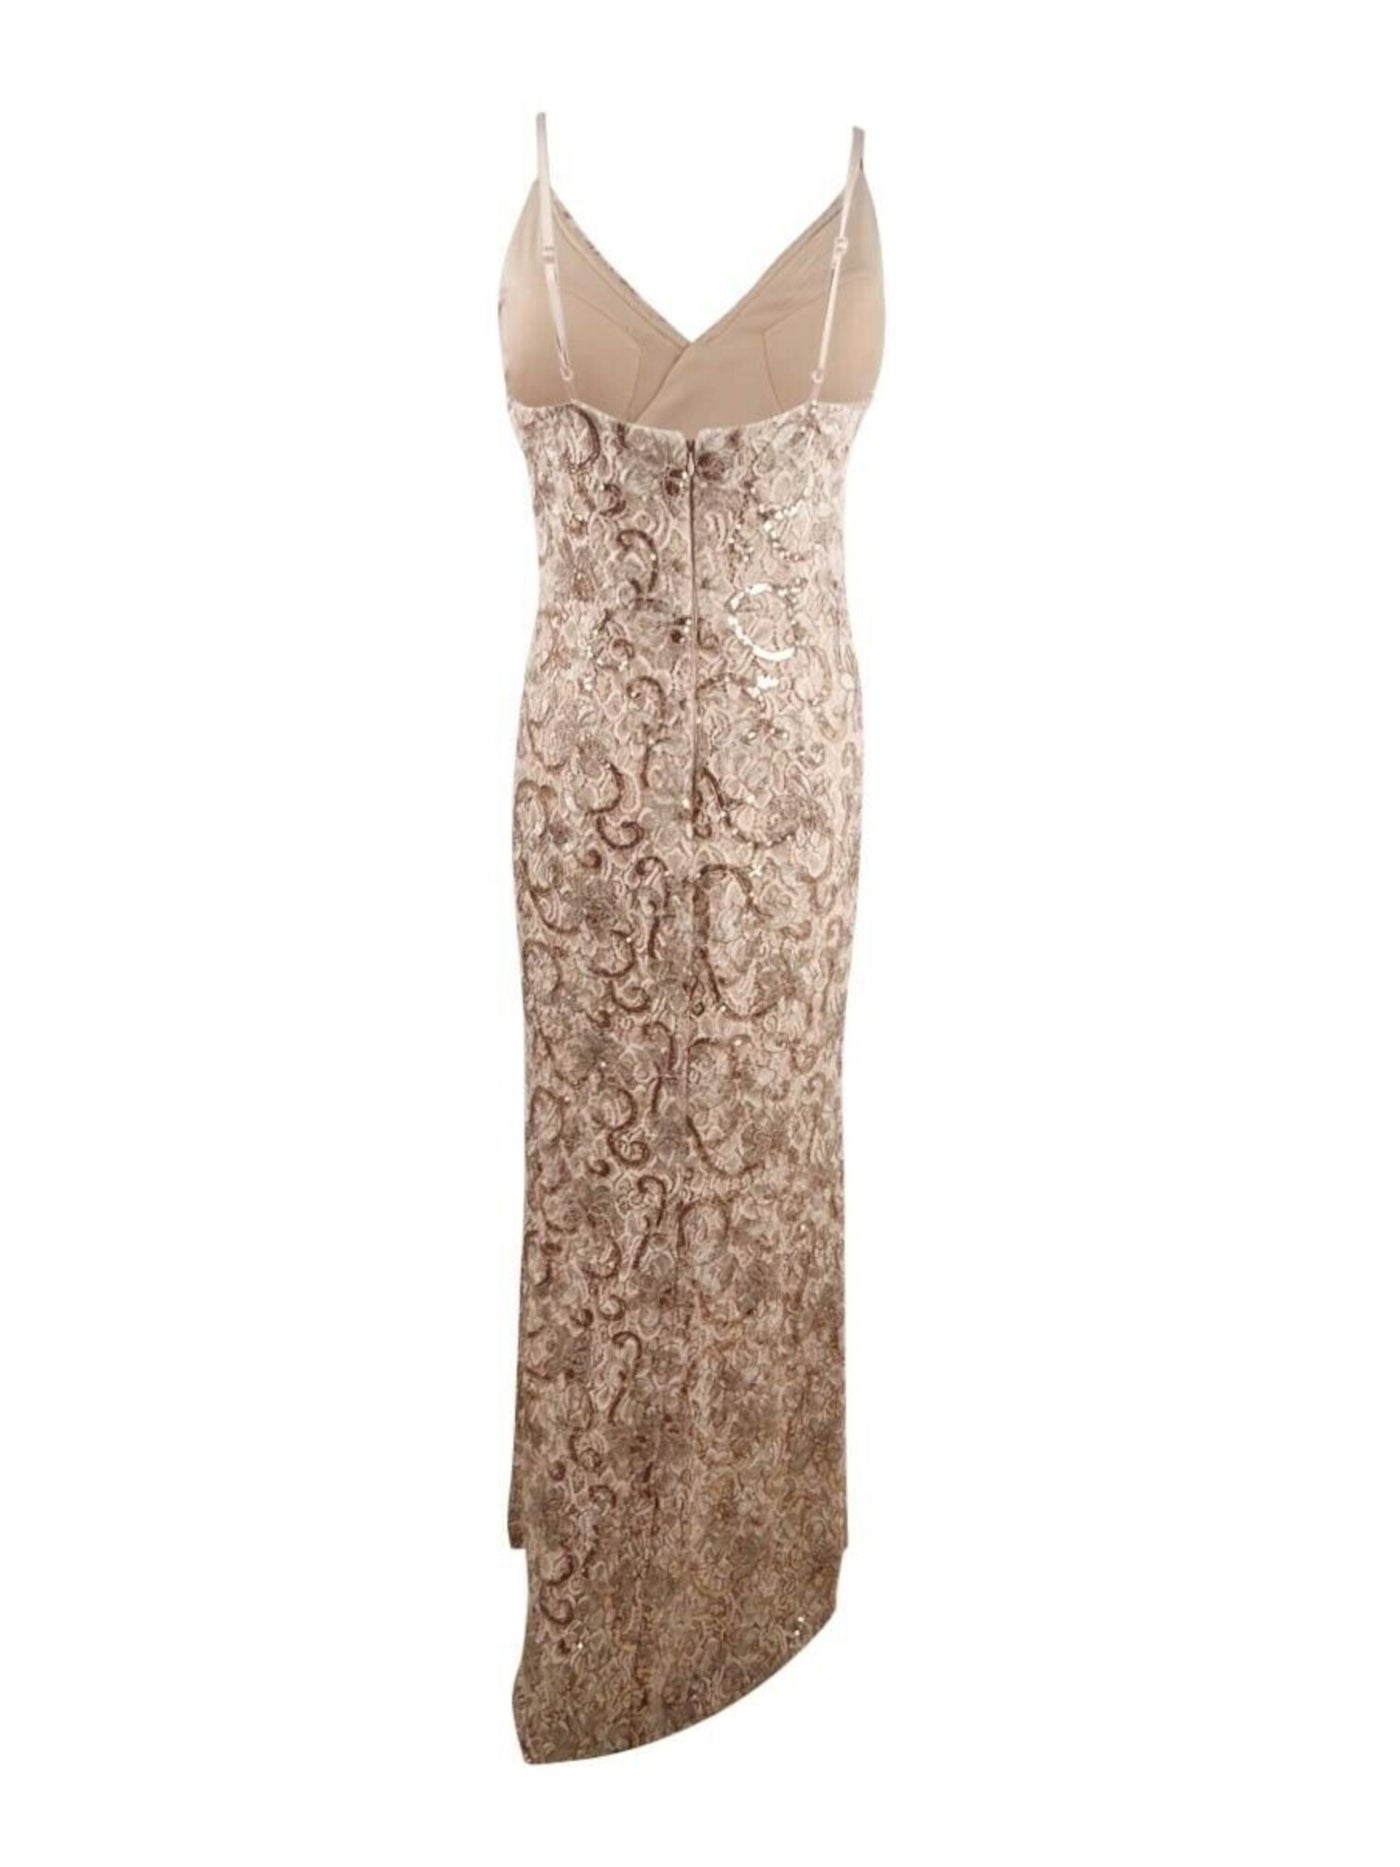 VINCE CAMUTO Womens Beige Sequined Lace Floral Spaghetti Strap V Neck Full-Length Formal Sheath Dress 6